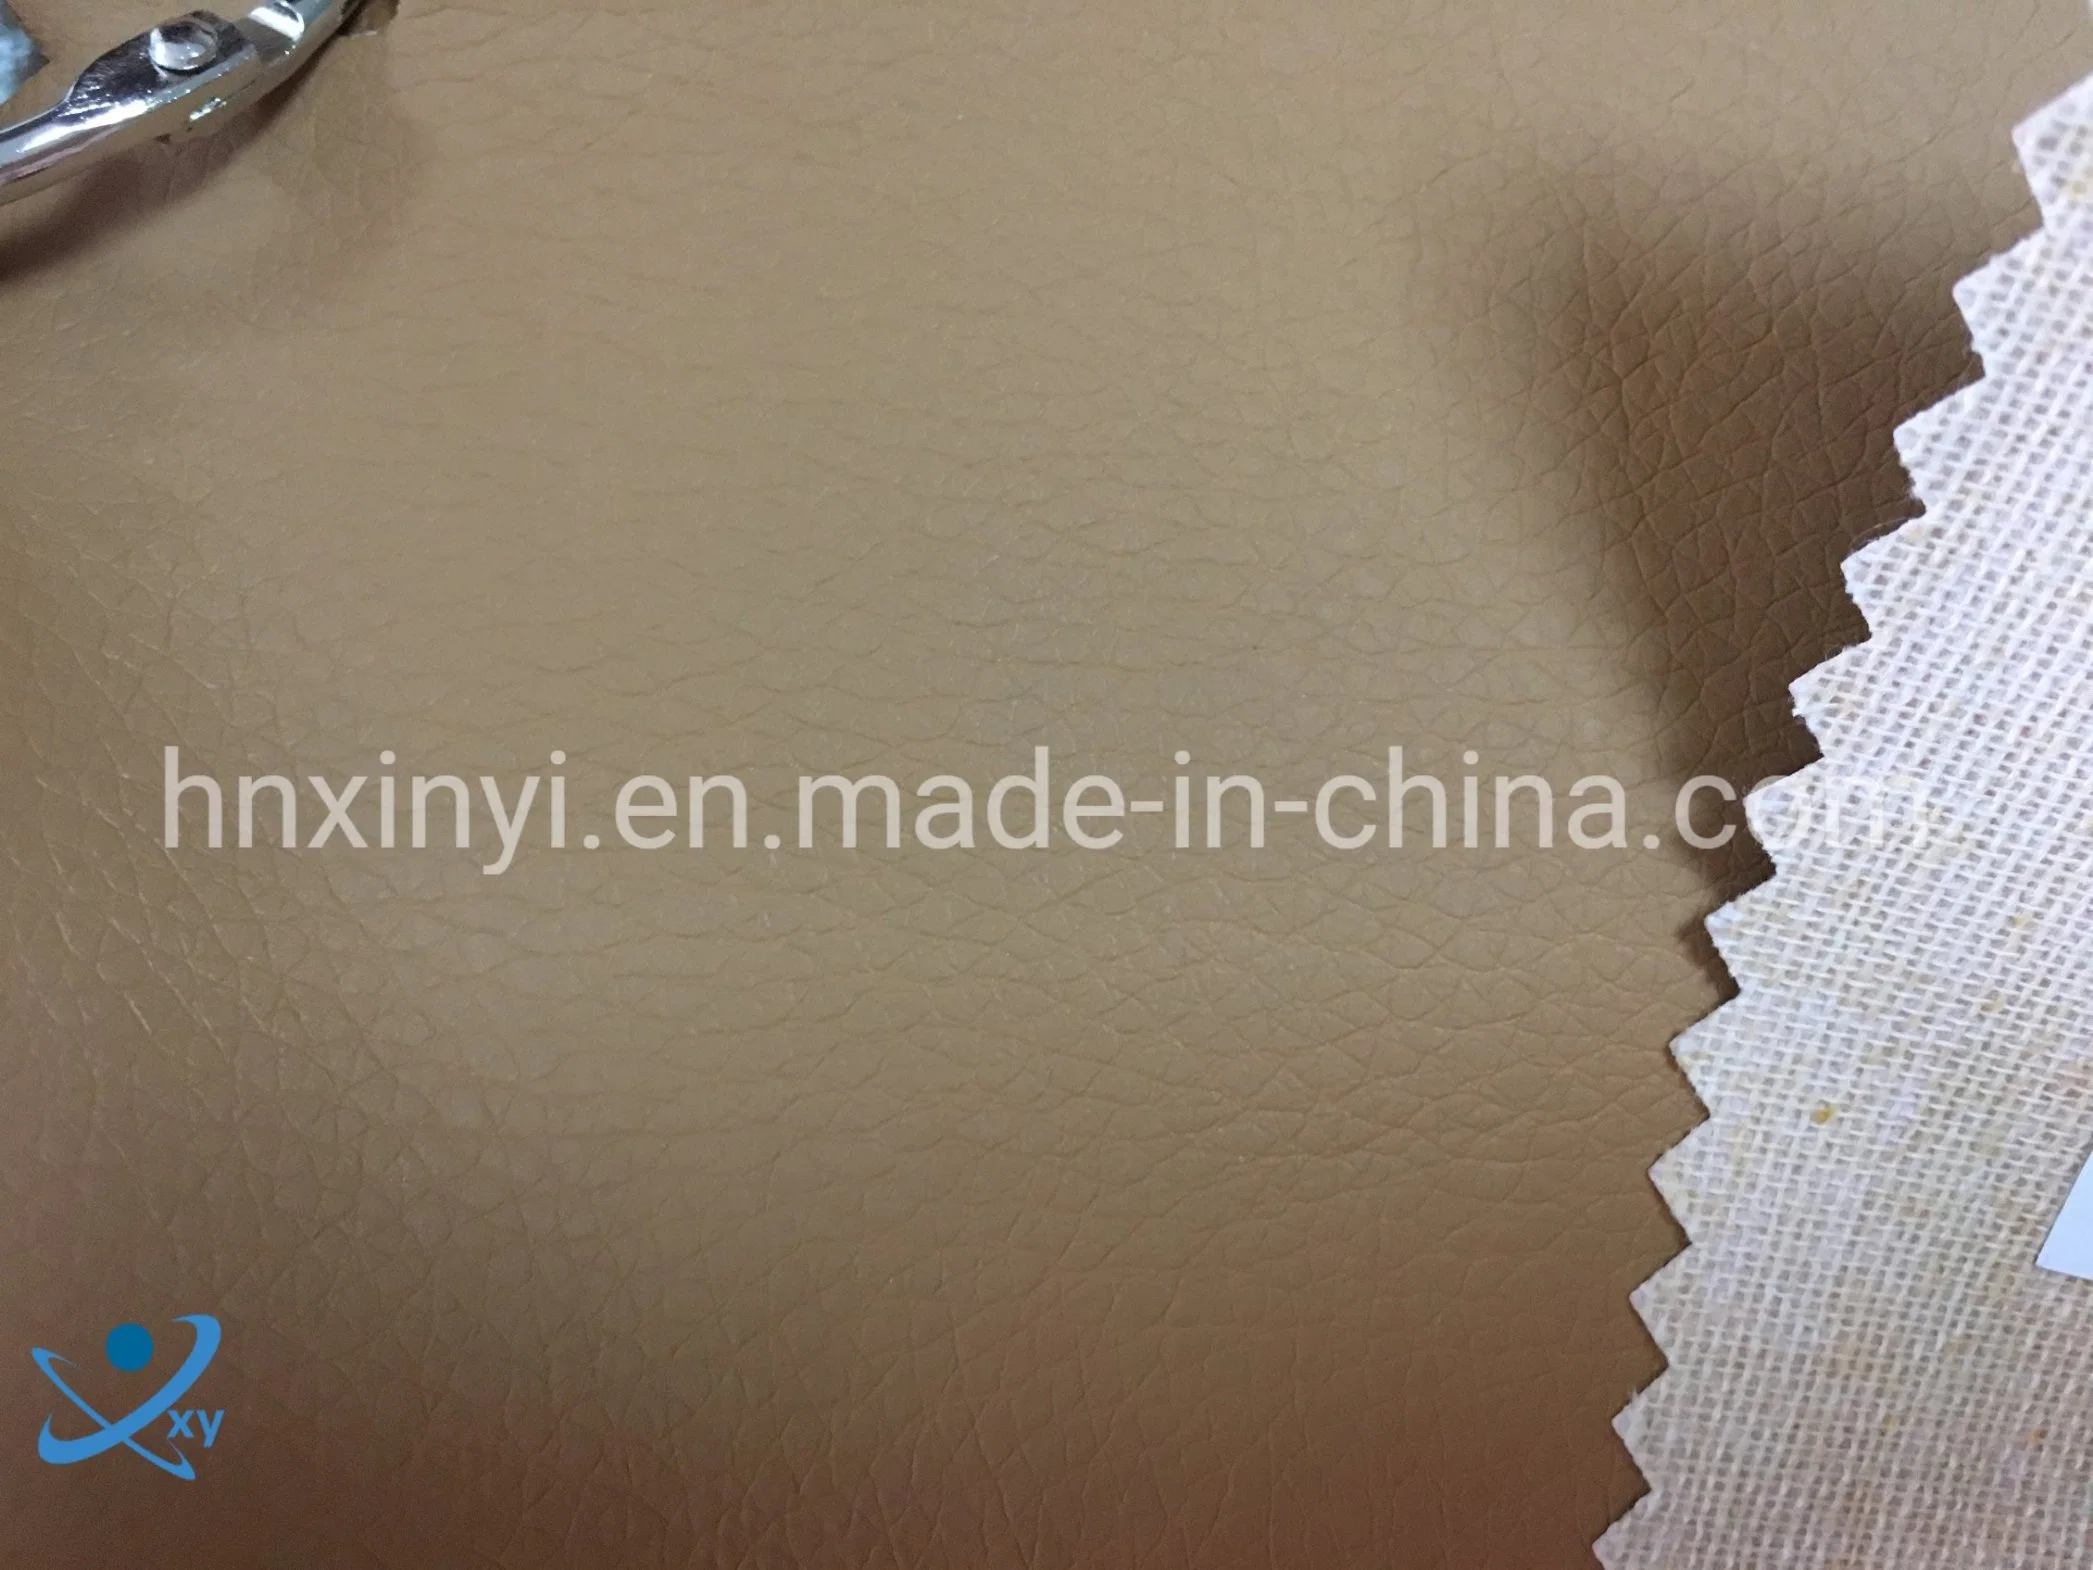 Widely Use Textured Sofa Leather Soft PU Material Synthetic Artificial Faux Leather Fabric Textiles Leather for China